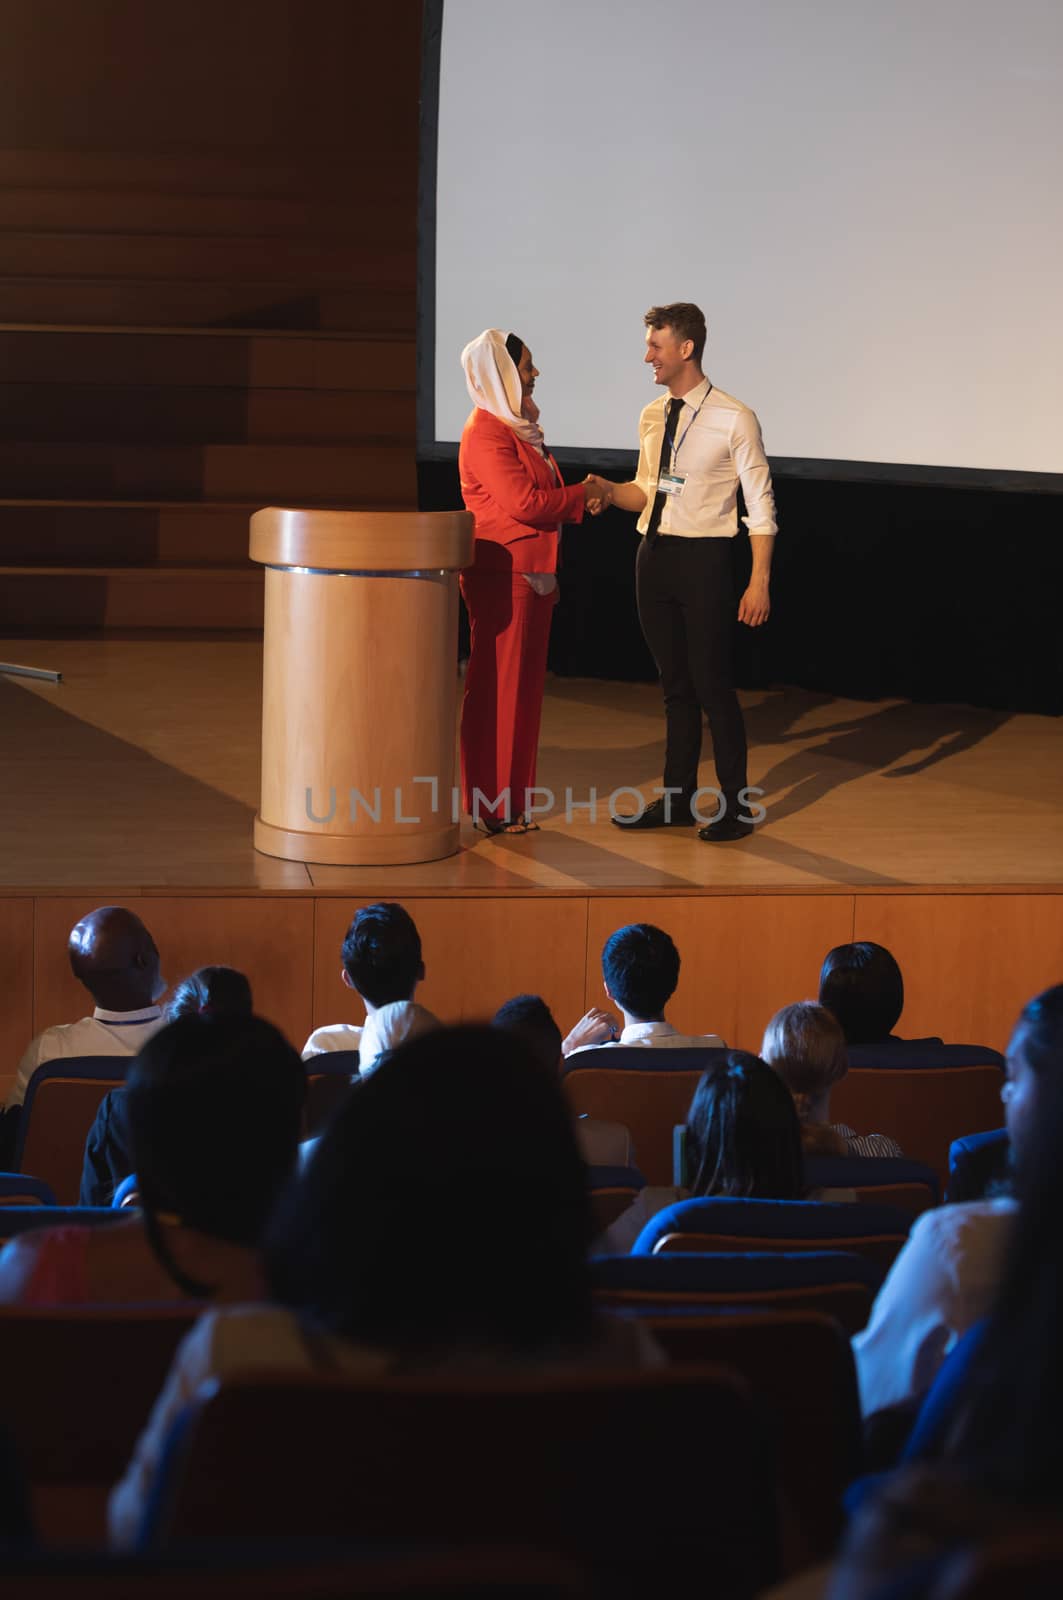 Business colleague standing and discussing with each other in front of the audience in auditorium by Wavebreakmedia